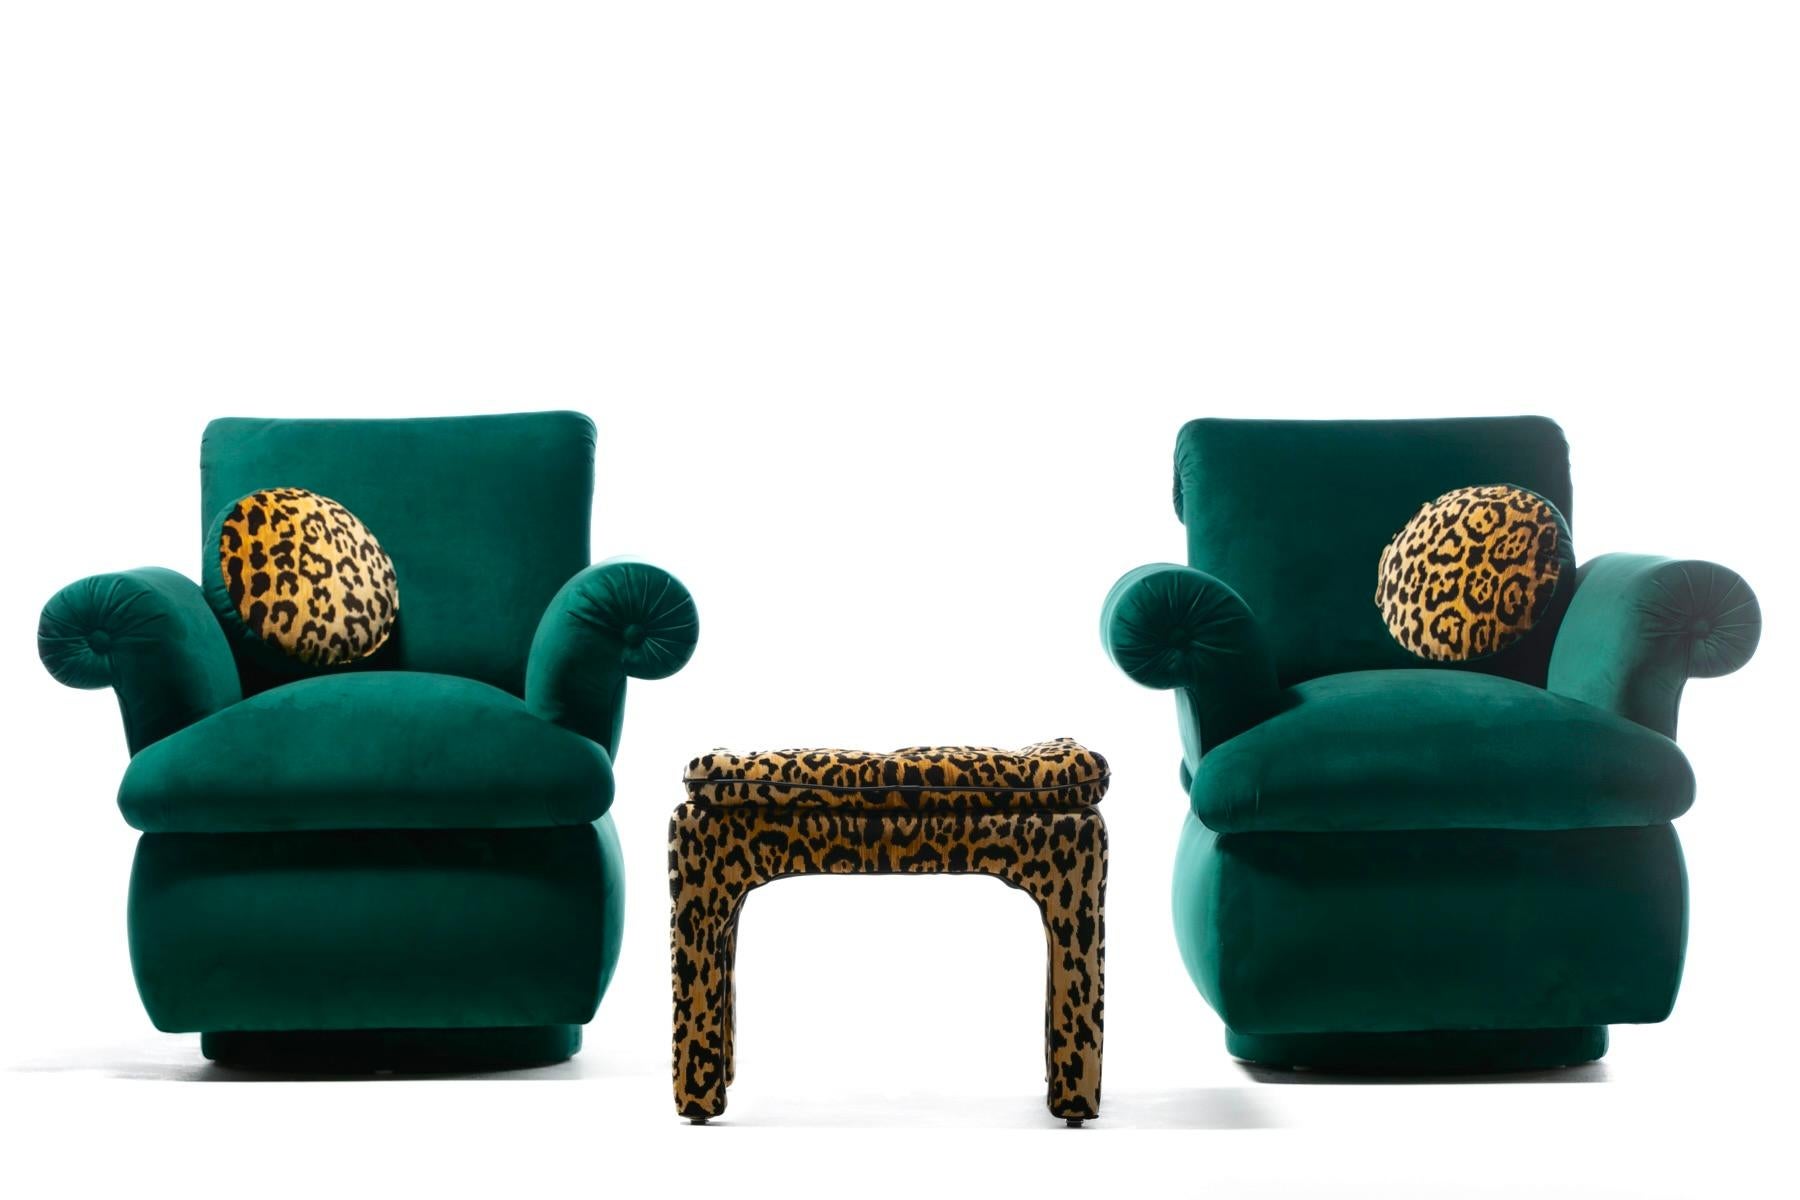 Swivel elegantly about and take in the room in these gregarious emerald velvet Dorothy Draper style swivel chairs. From every single angle - every single one - these chairs deliver sculptural elegance that beckons. Fun. Unexpected. High fashion